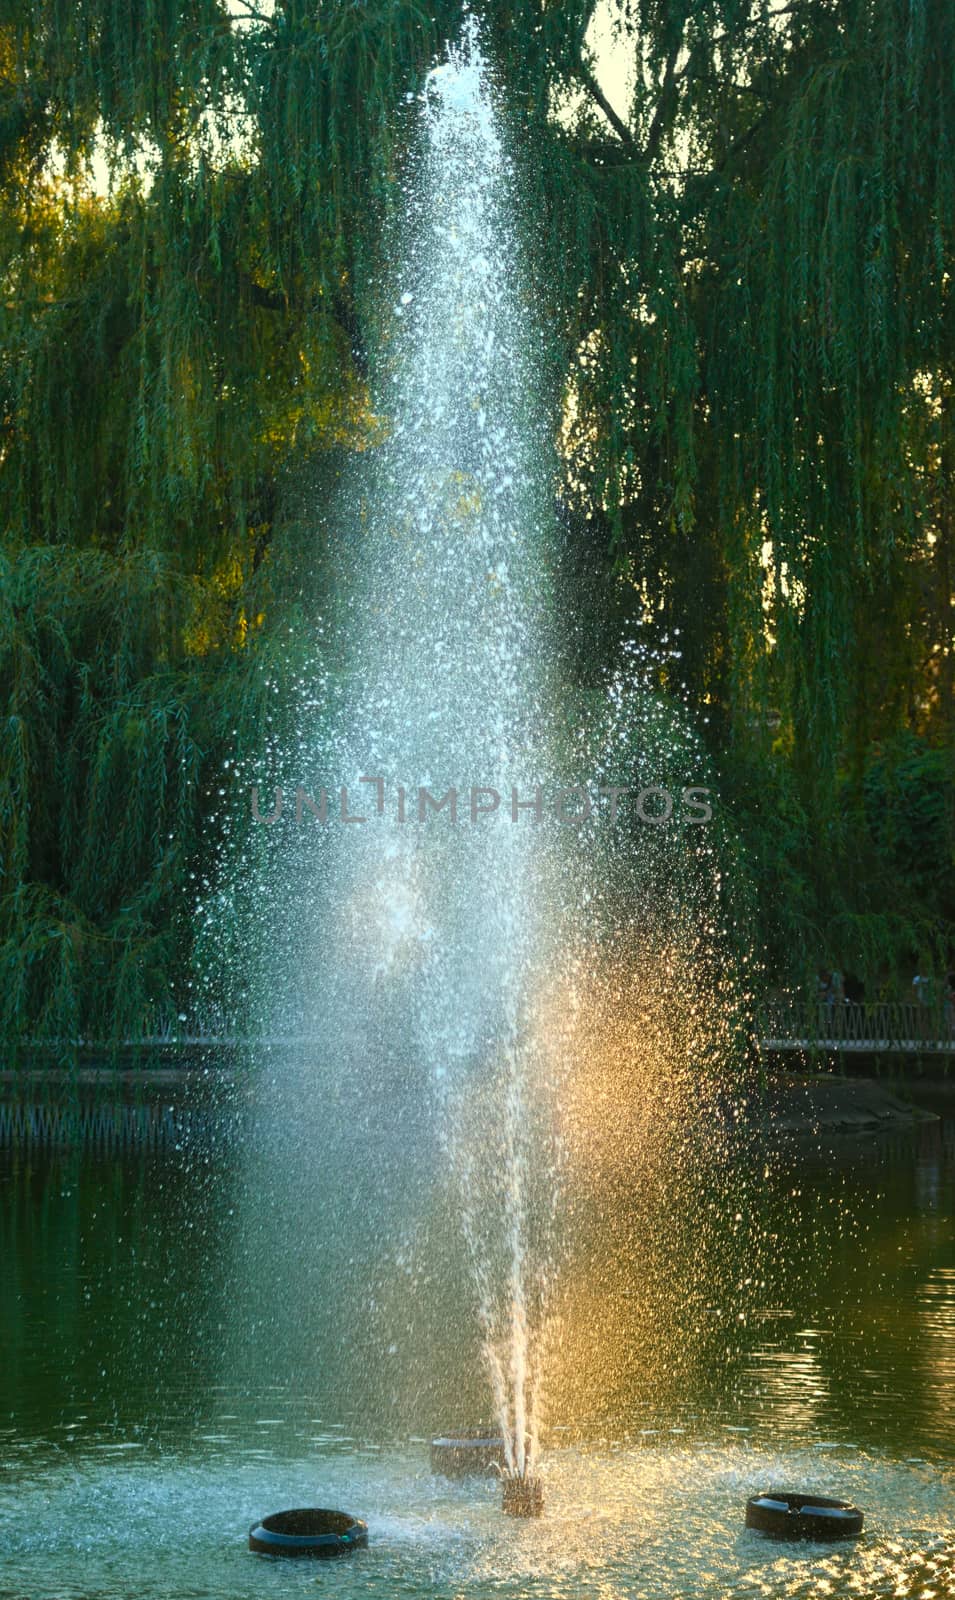 Jet of water from fountain in lake with tree in background